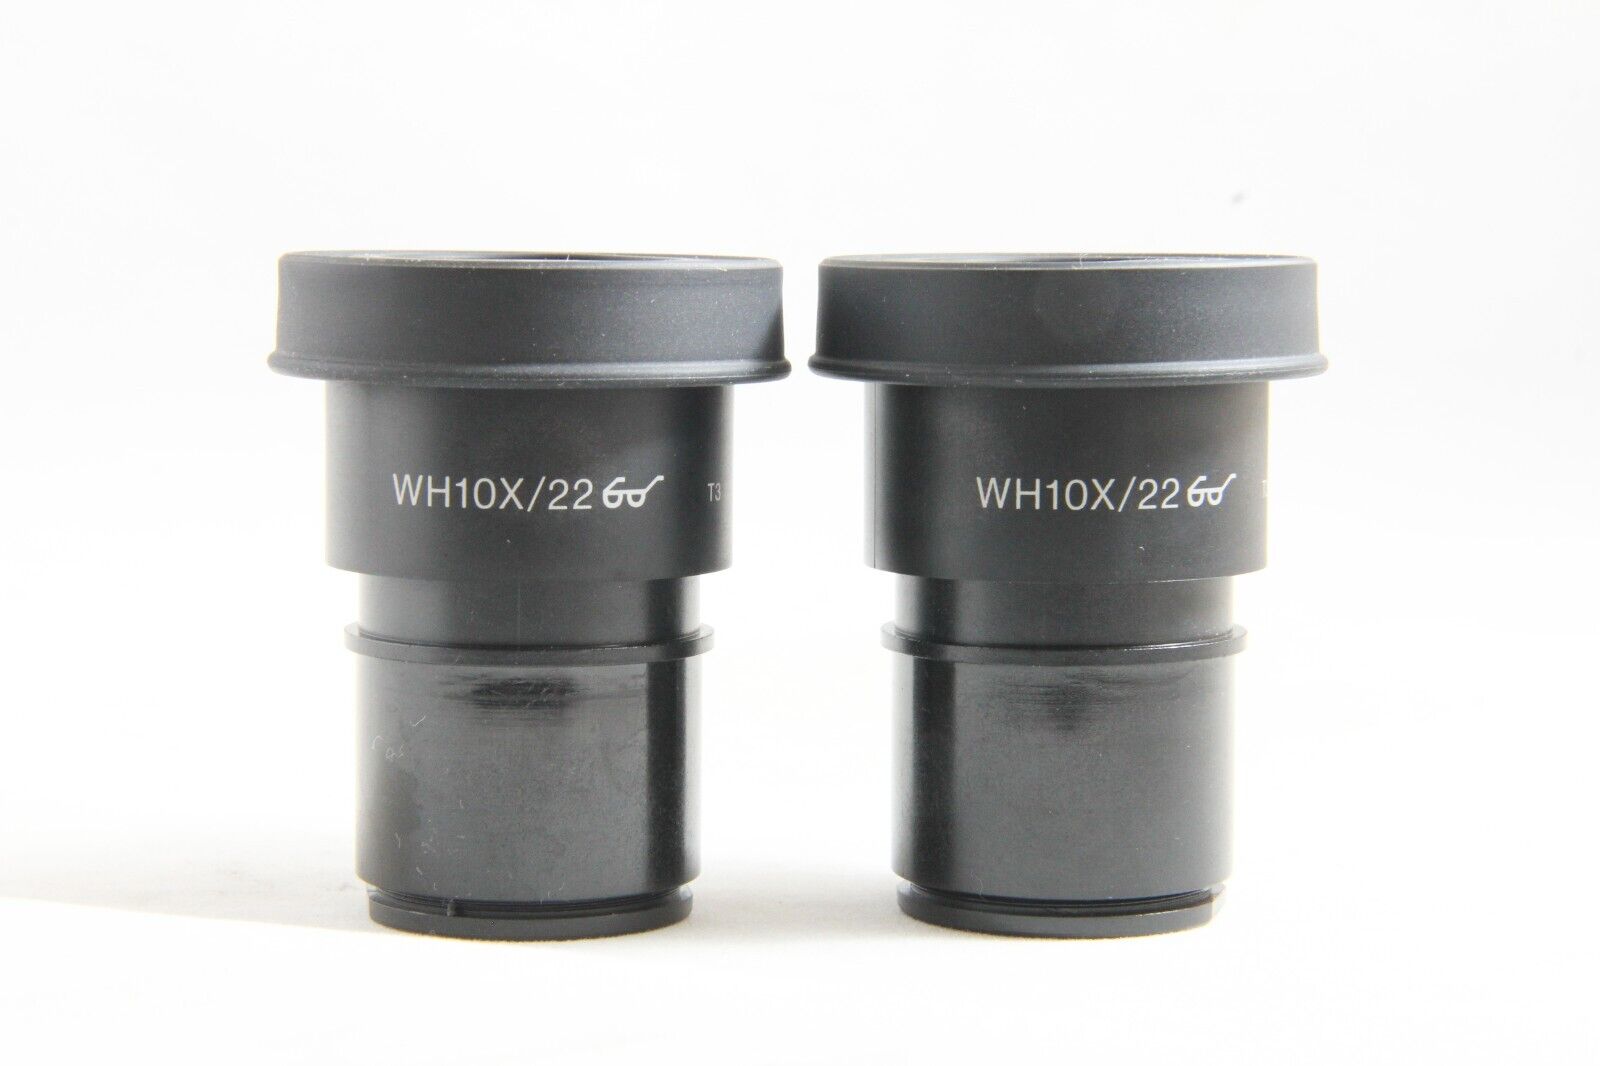 Excellent++ Pair of Olympus Microscope WH10X/22 T3 Eyepiece #4591